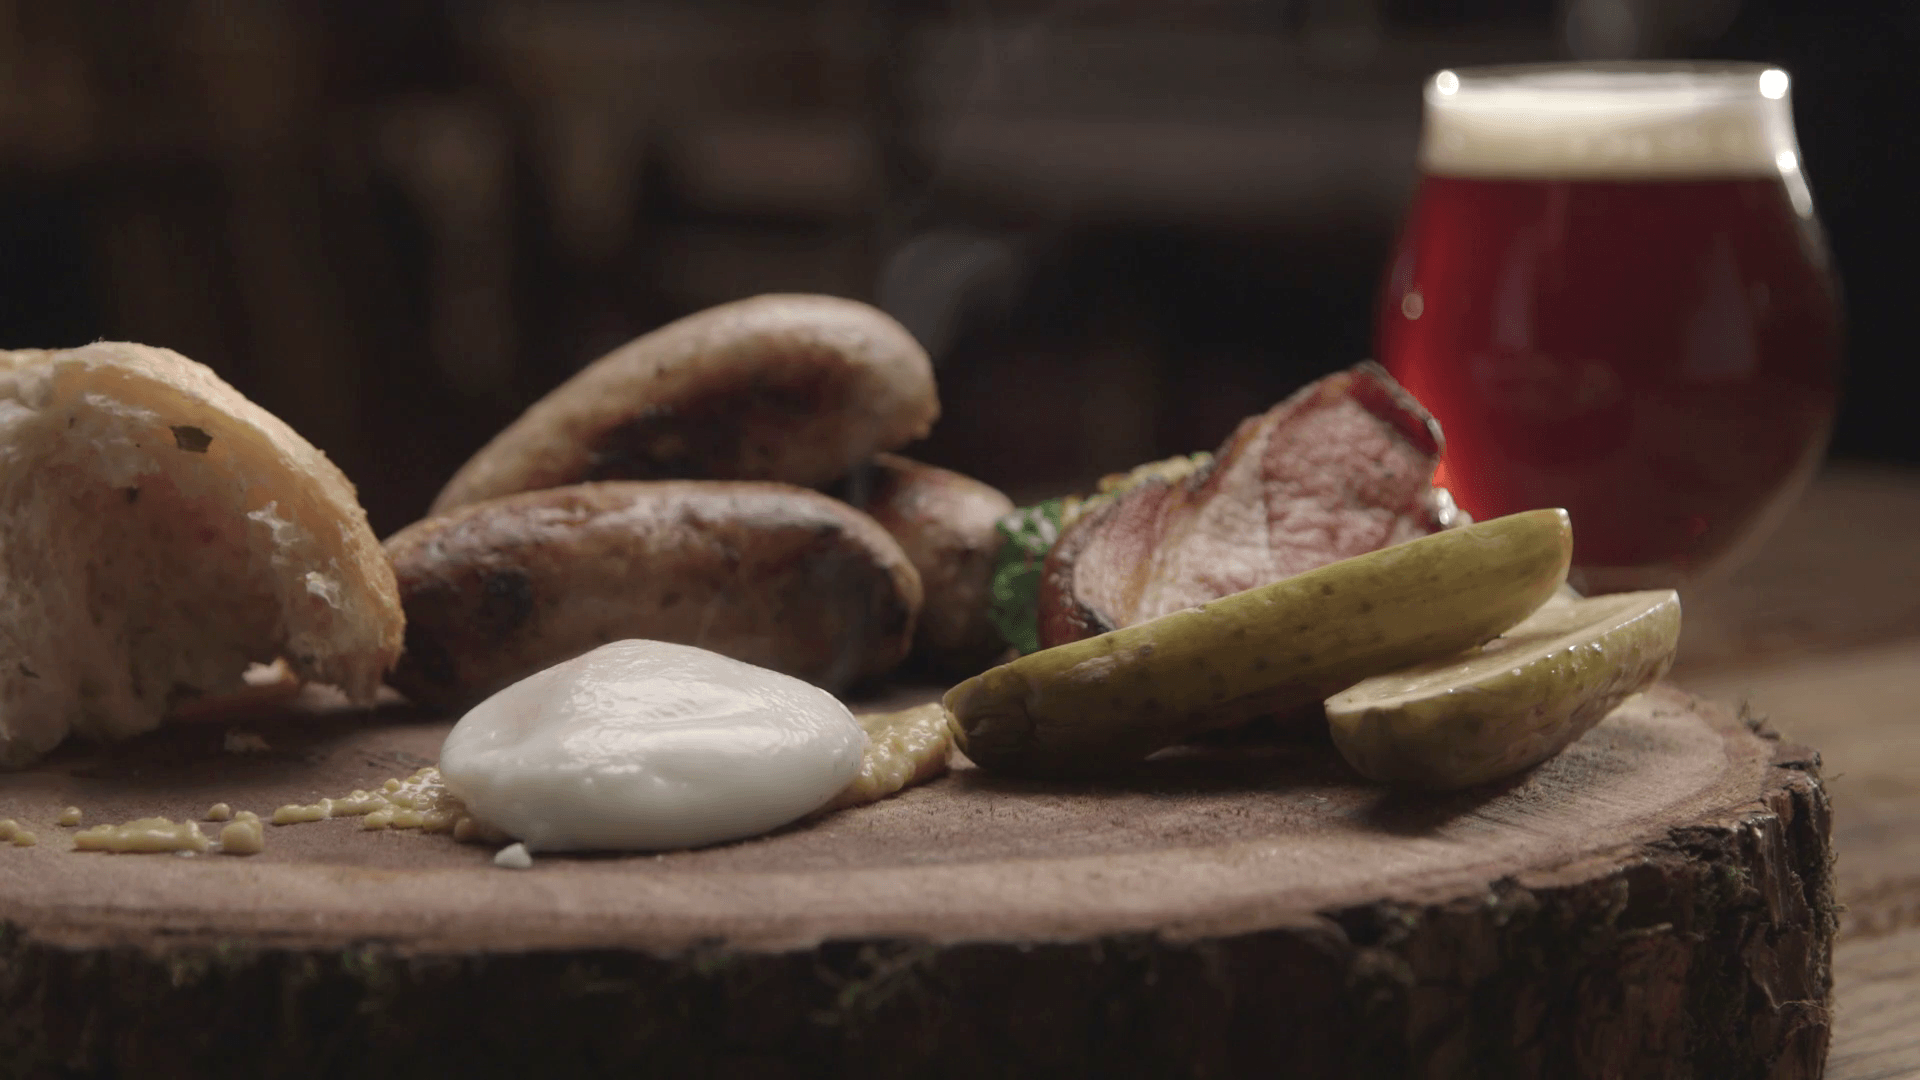 Delicious food and beer plated on rustic setting. Stock Video Footage